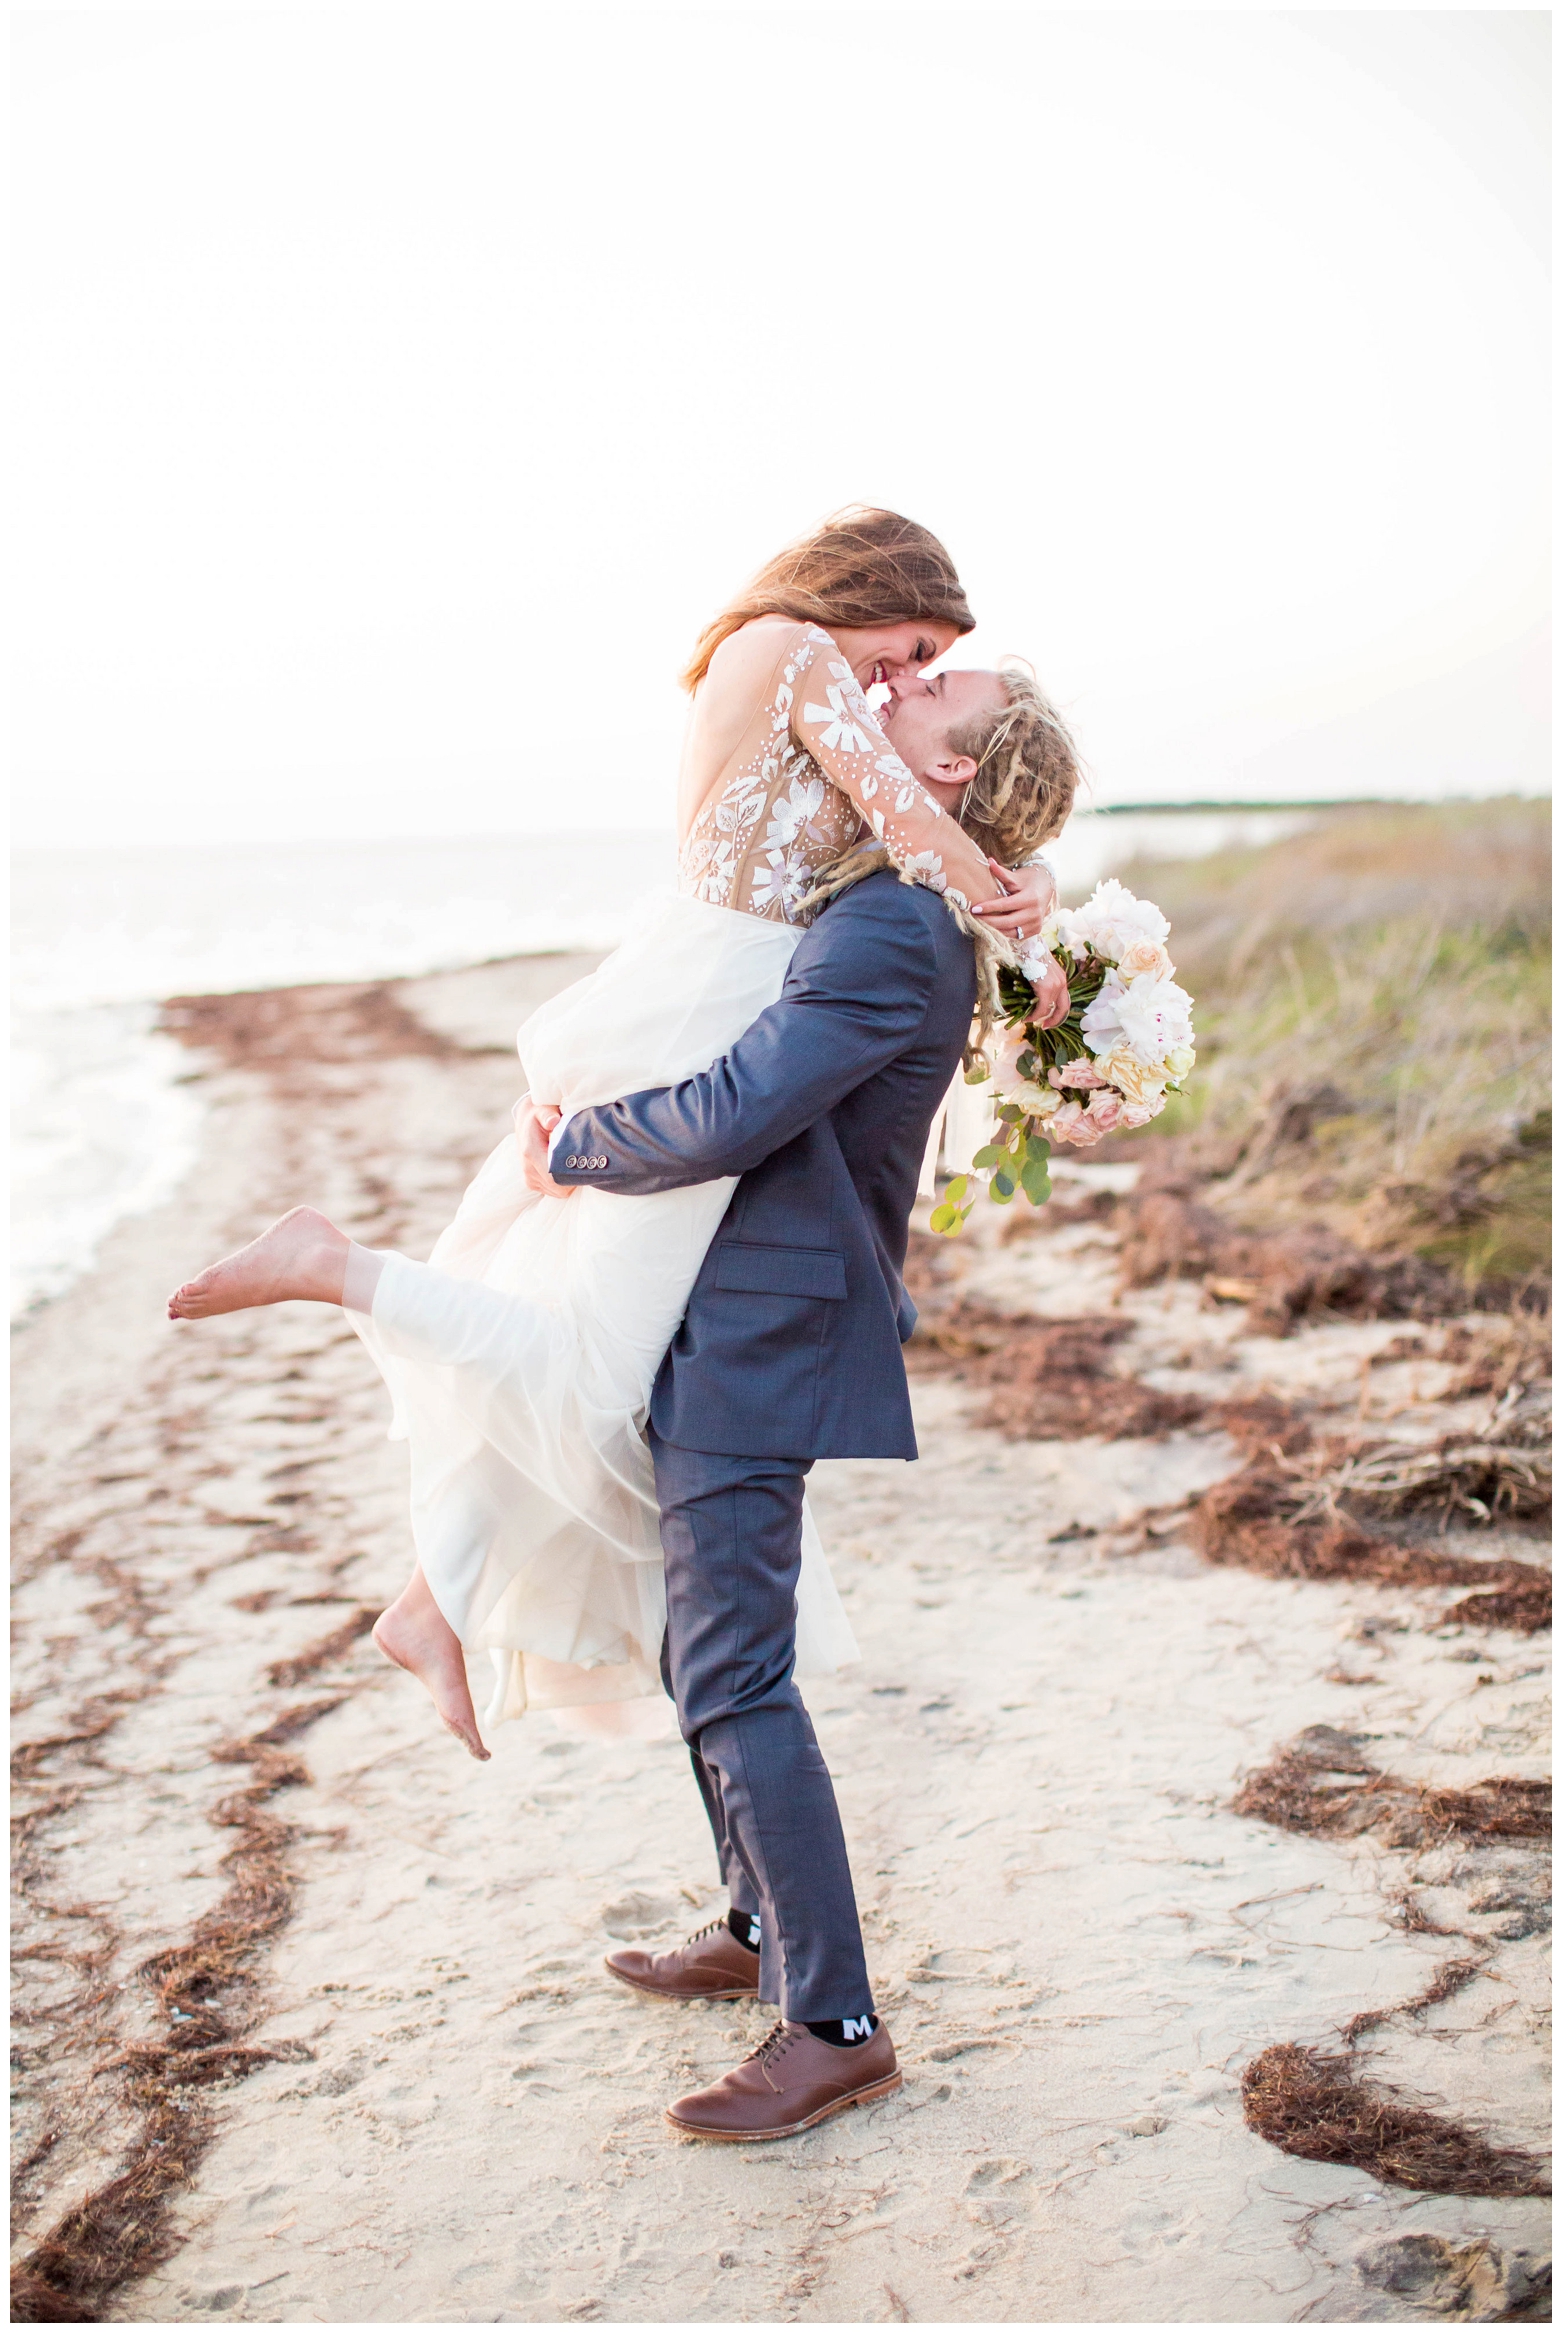 View More: http://hopetaylorphotographyphotos.pass.us/remy-and-eli